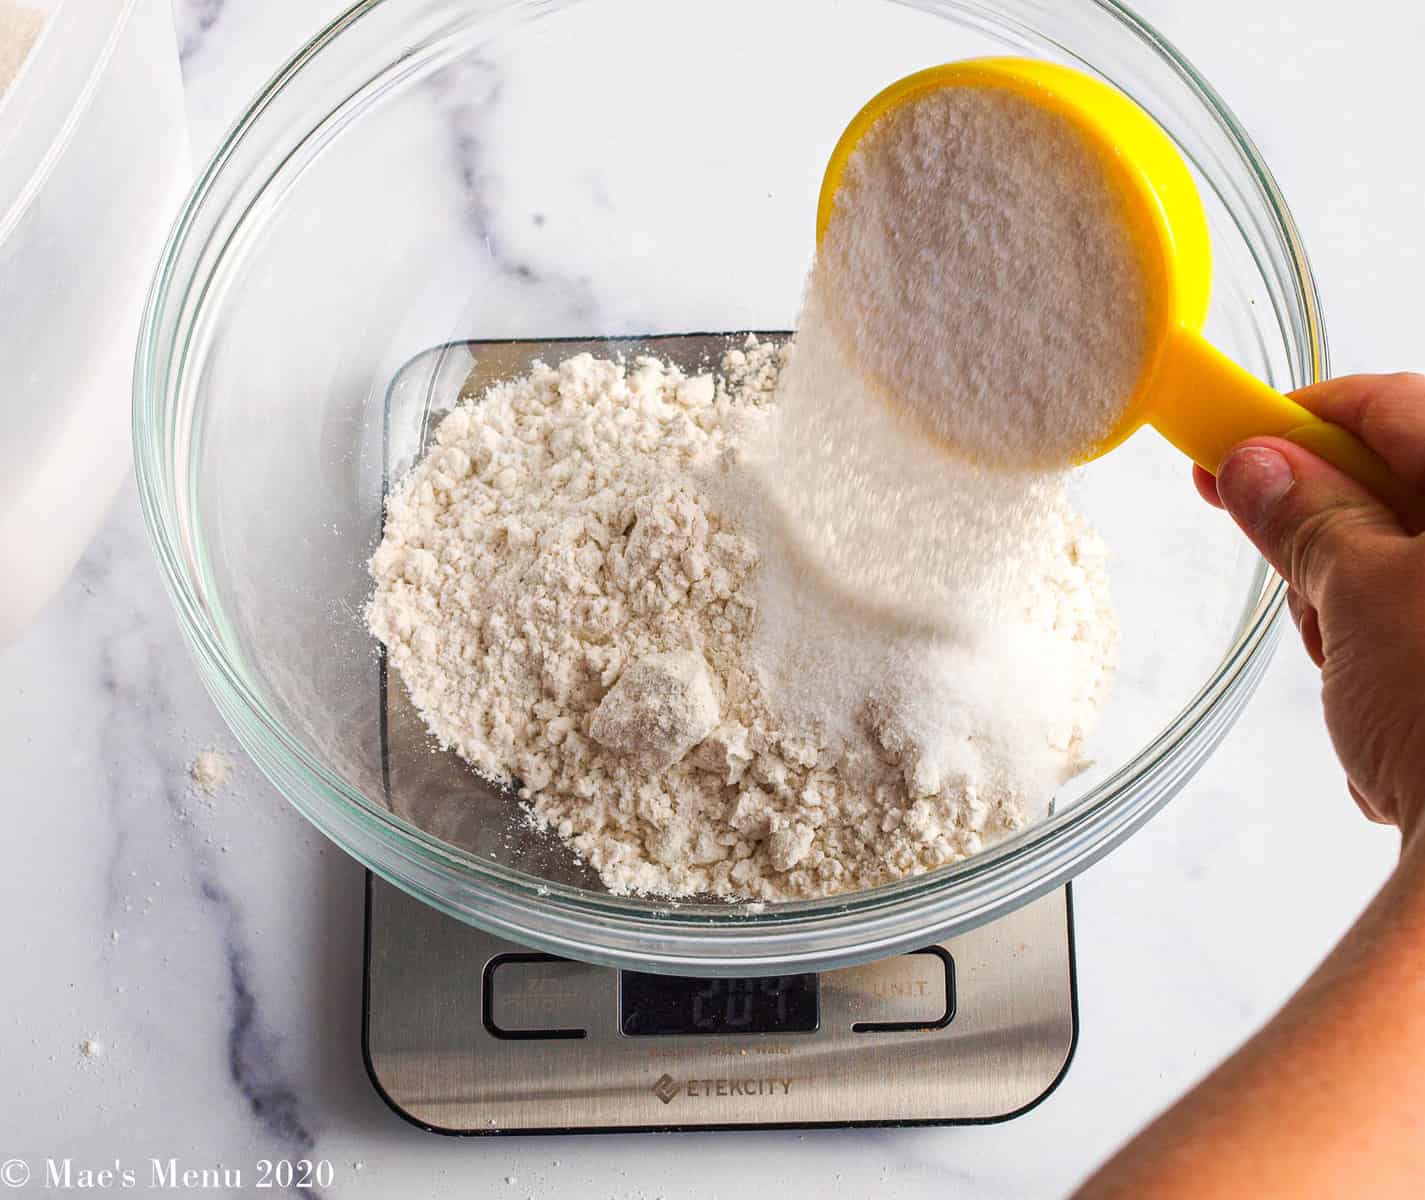 Pouring sugar into the flour in the bowl